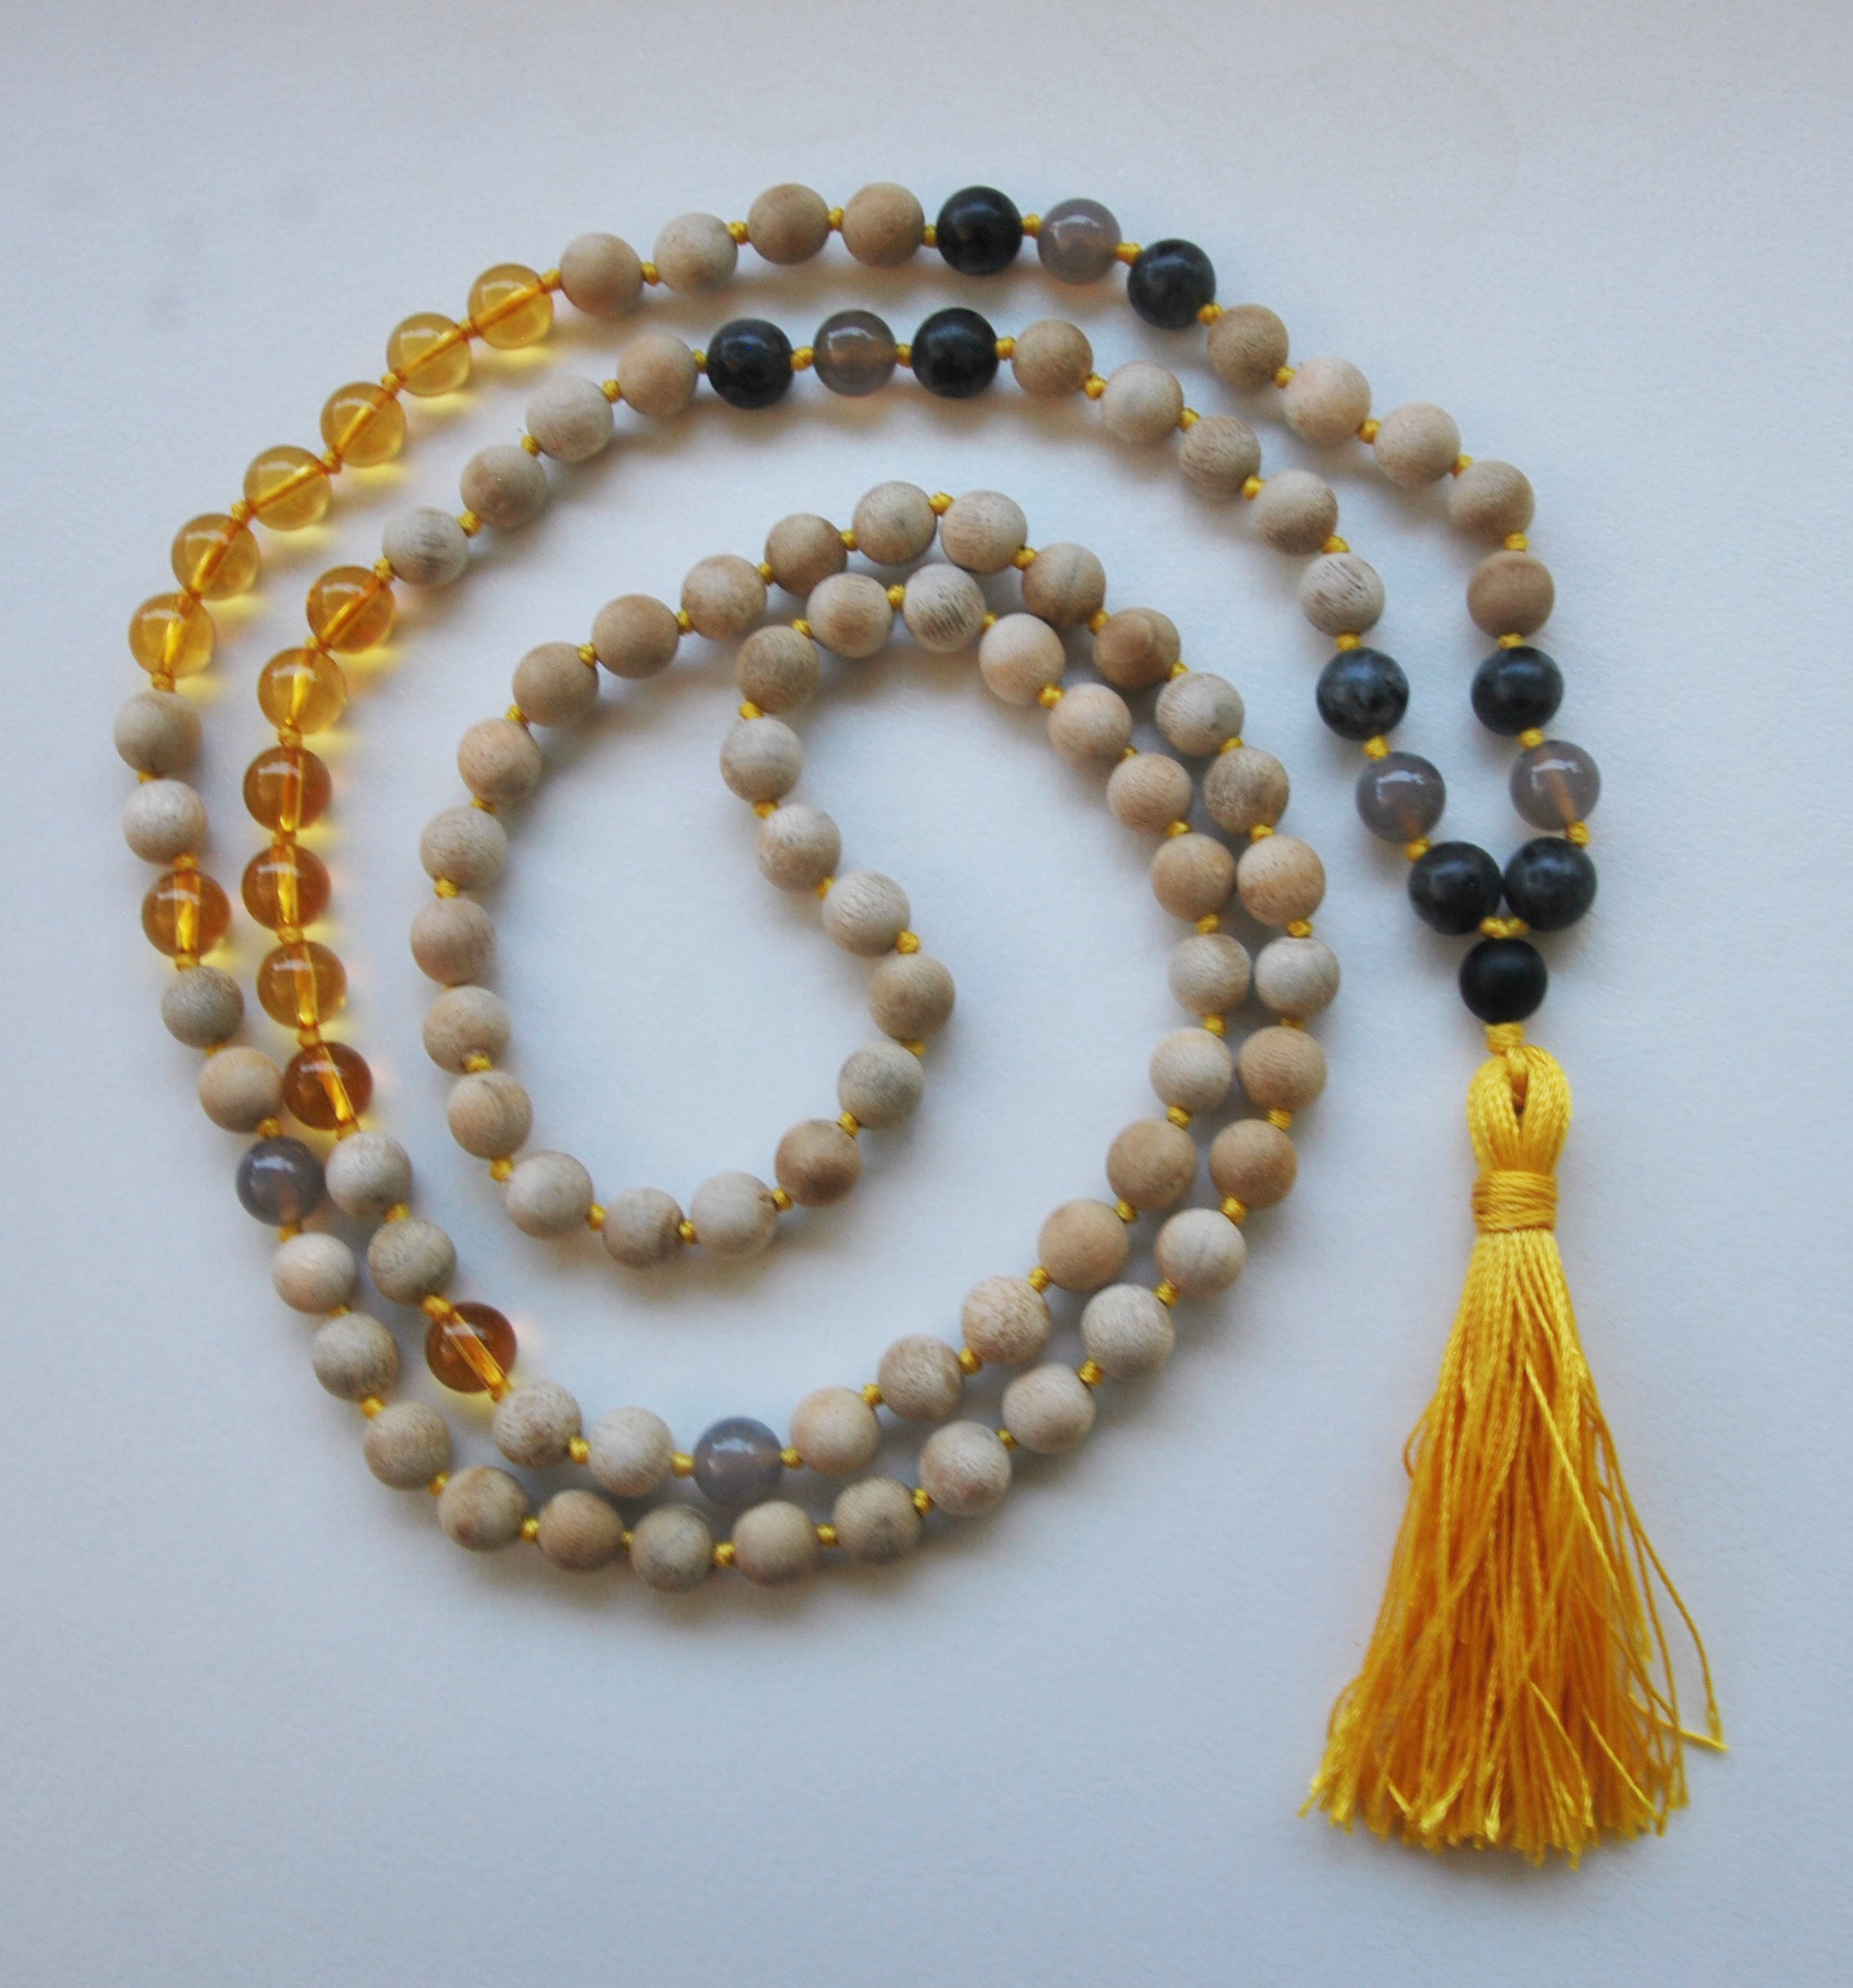 8mm Sandalwood & Citrine 108 Knotted Mala Necklace with Colored Tassel